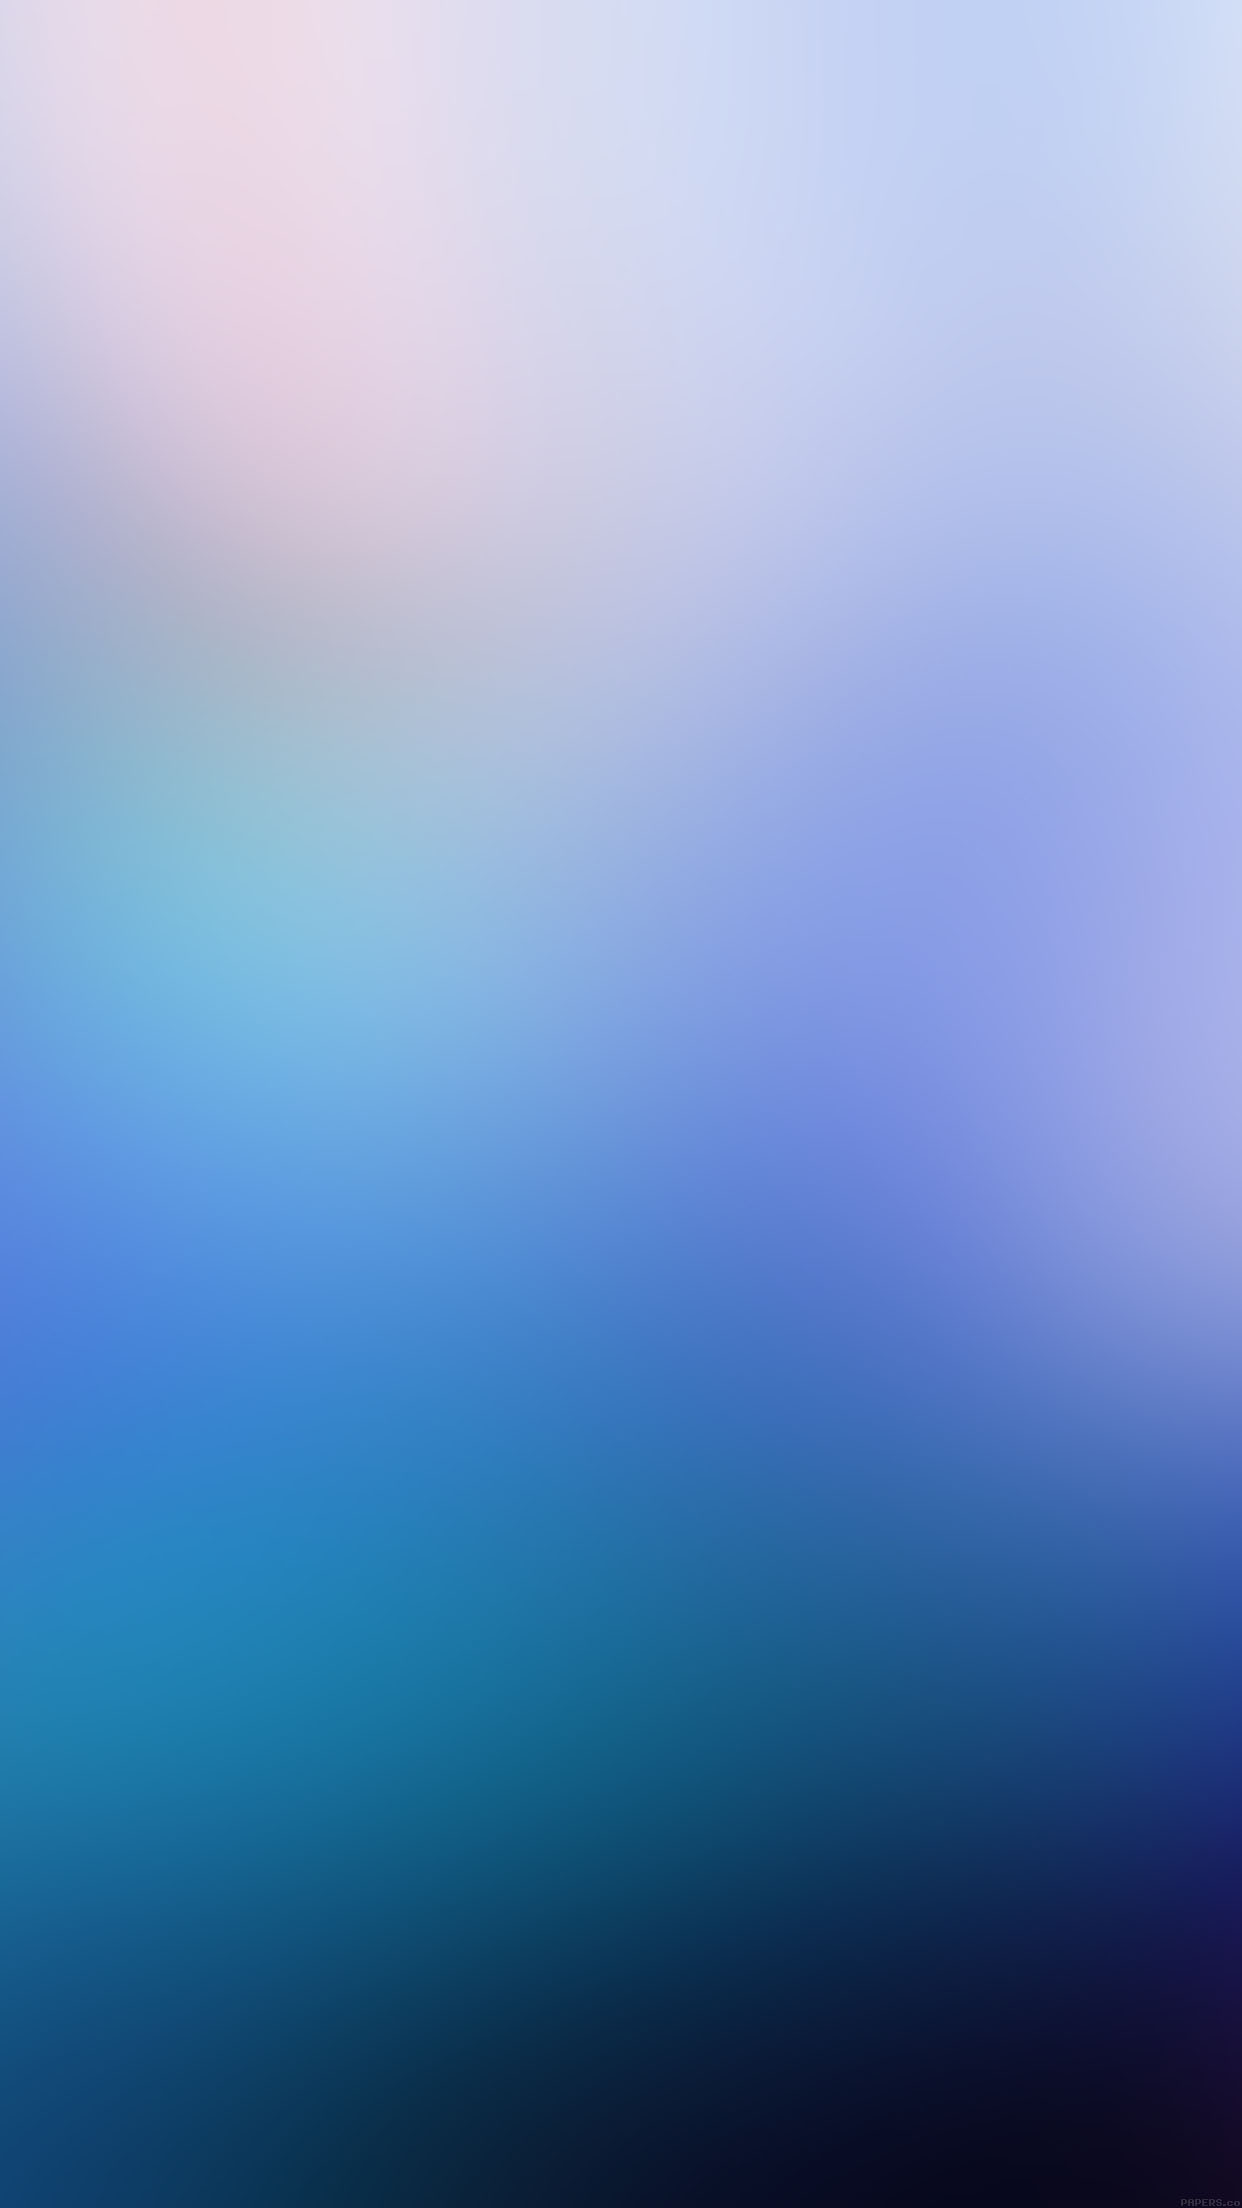 Wallpaper Nature In Blue Blur Android Wallpaper - Blue Blur Wallpaper Iphone - HD Wallpaper 